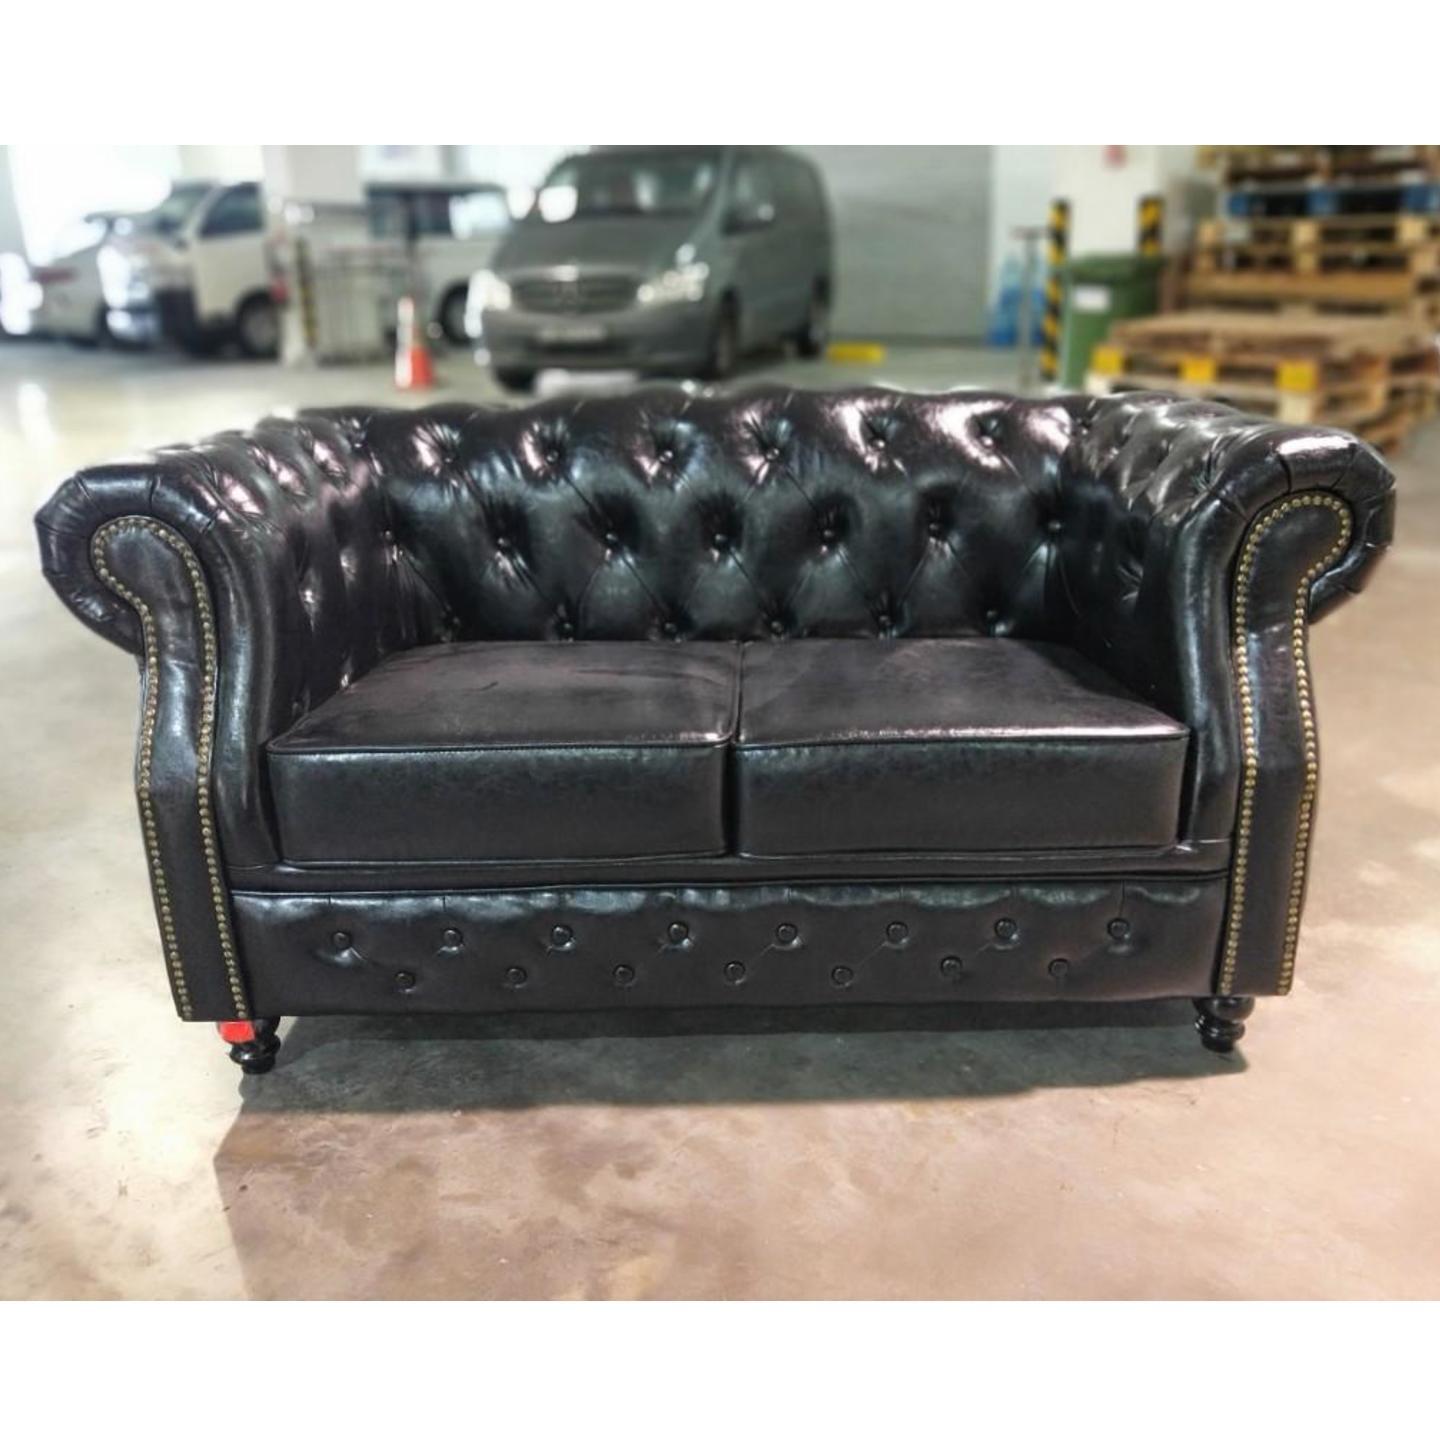 PRE-ORDER BOTTEVA 2 Seater Chesterfield Sofa in GLOSS BLACK PU -Estimated for Delivery in Mid August 2021